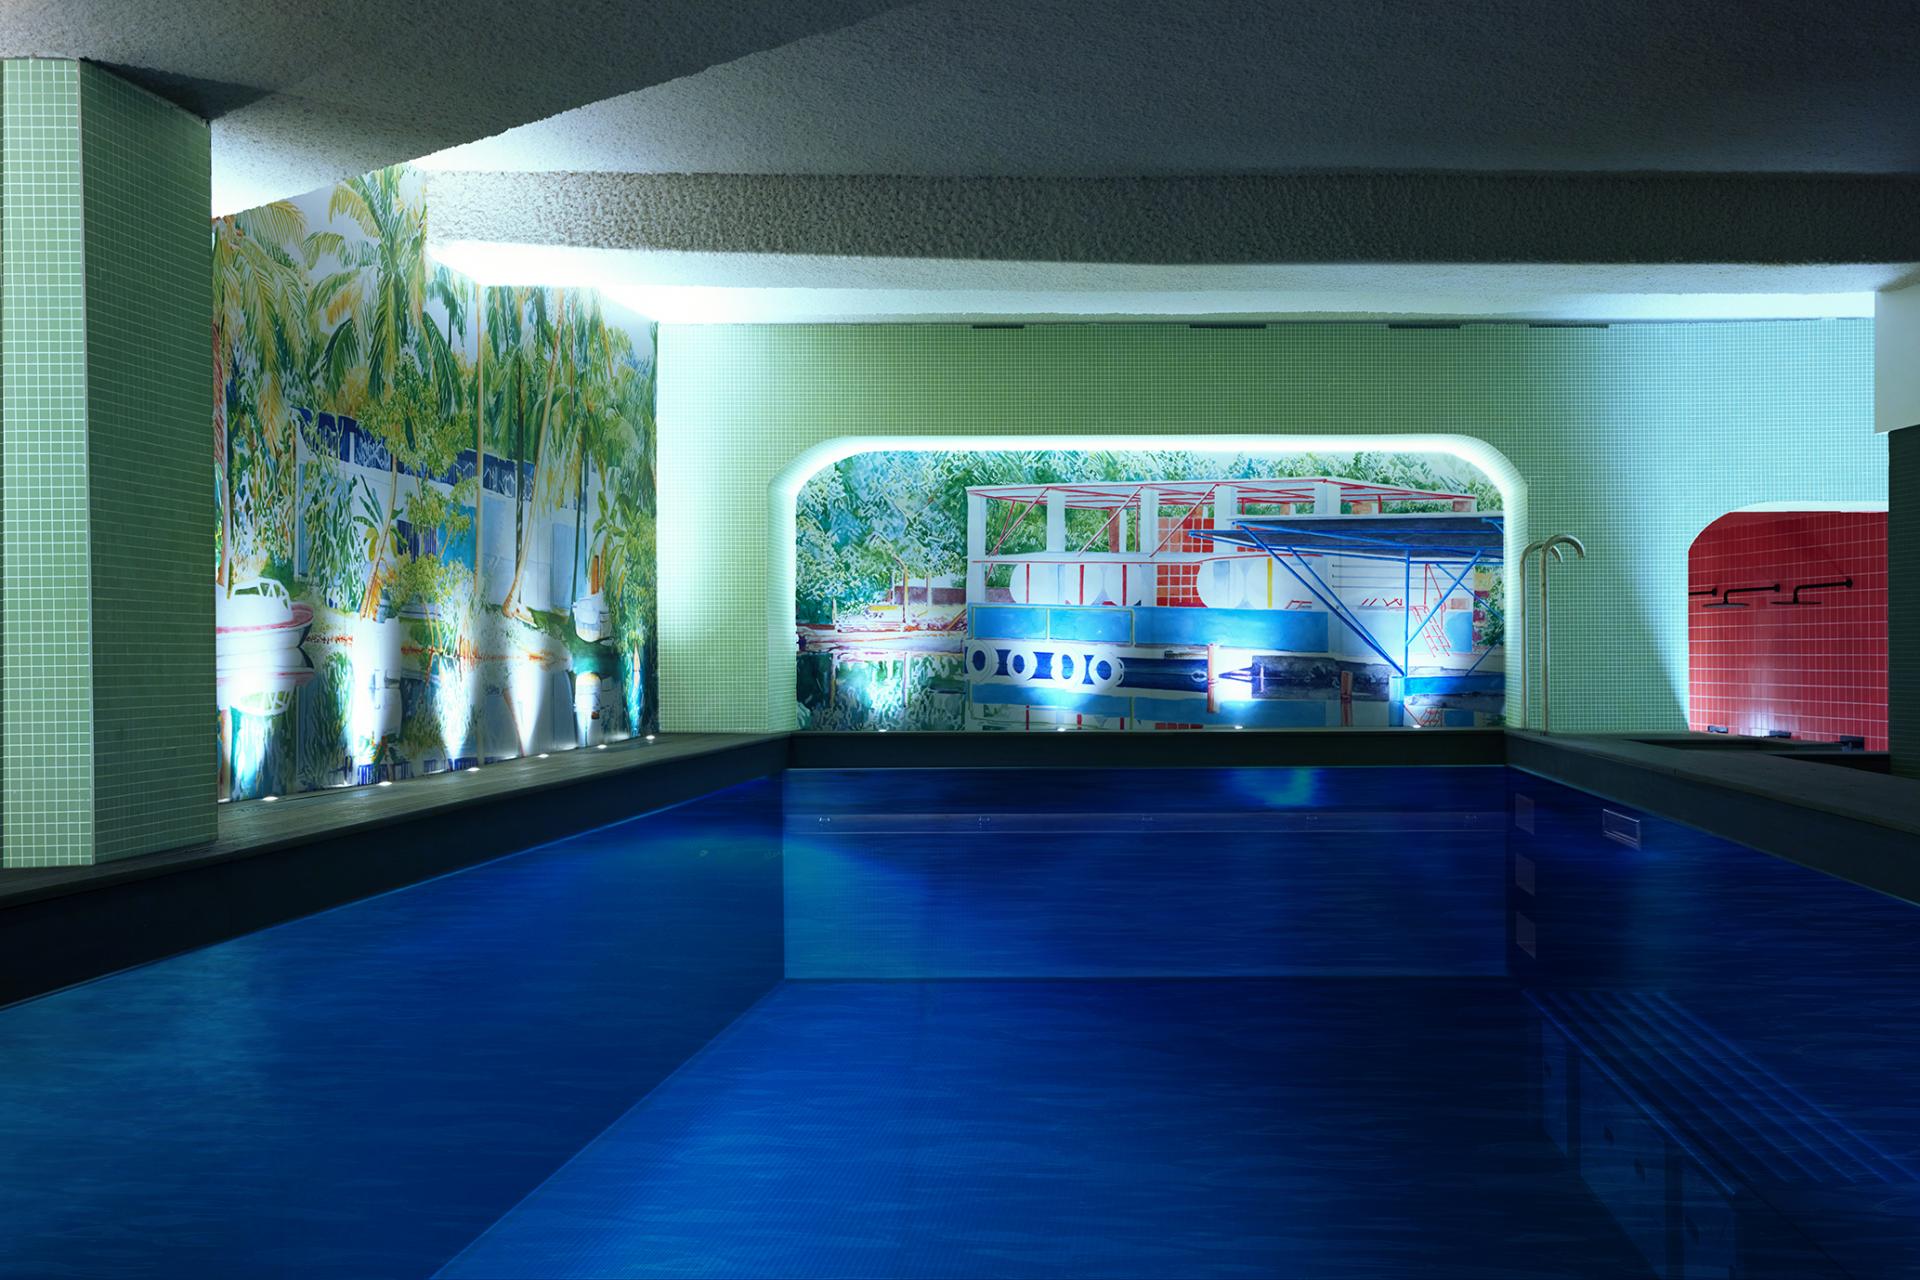 Floor -1 — Wellness centre and pool